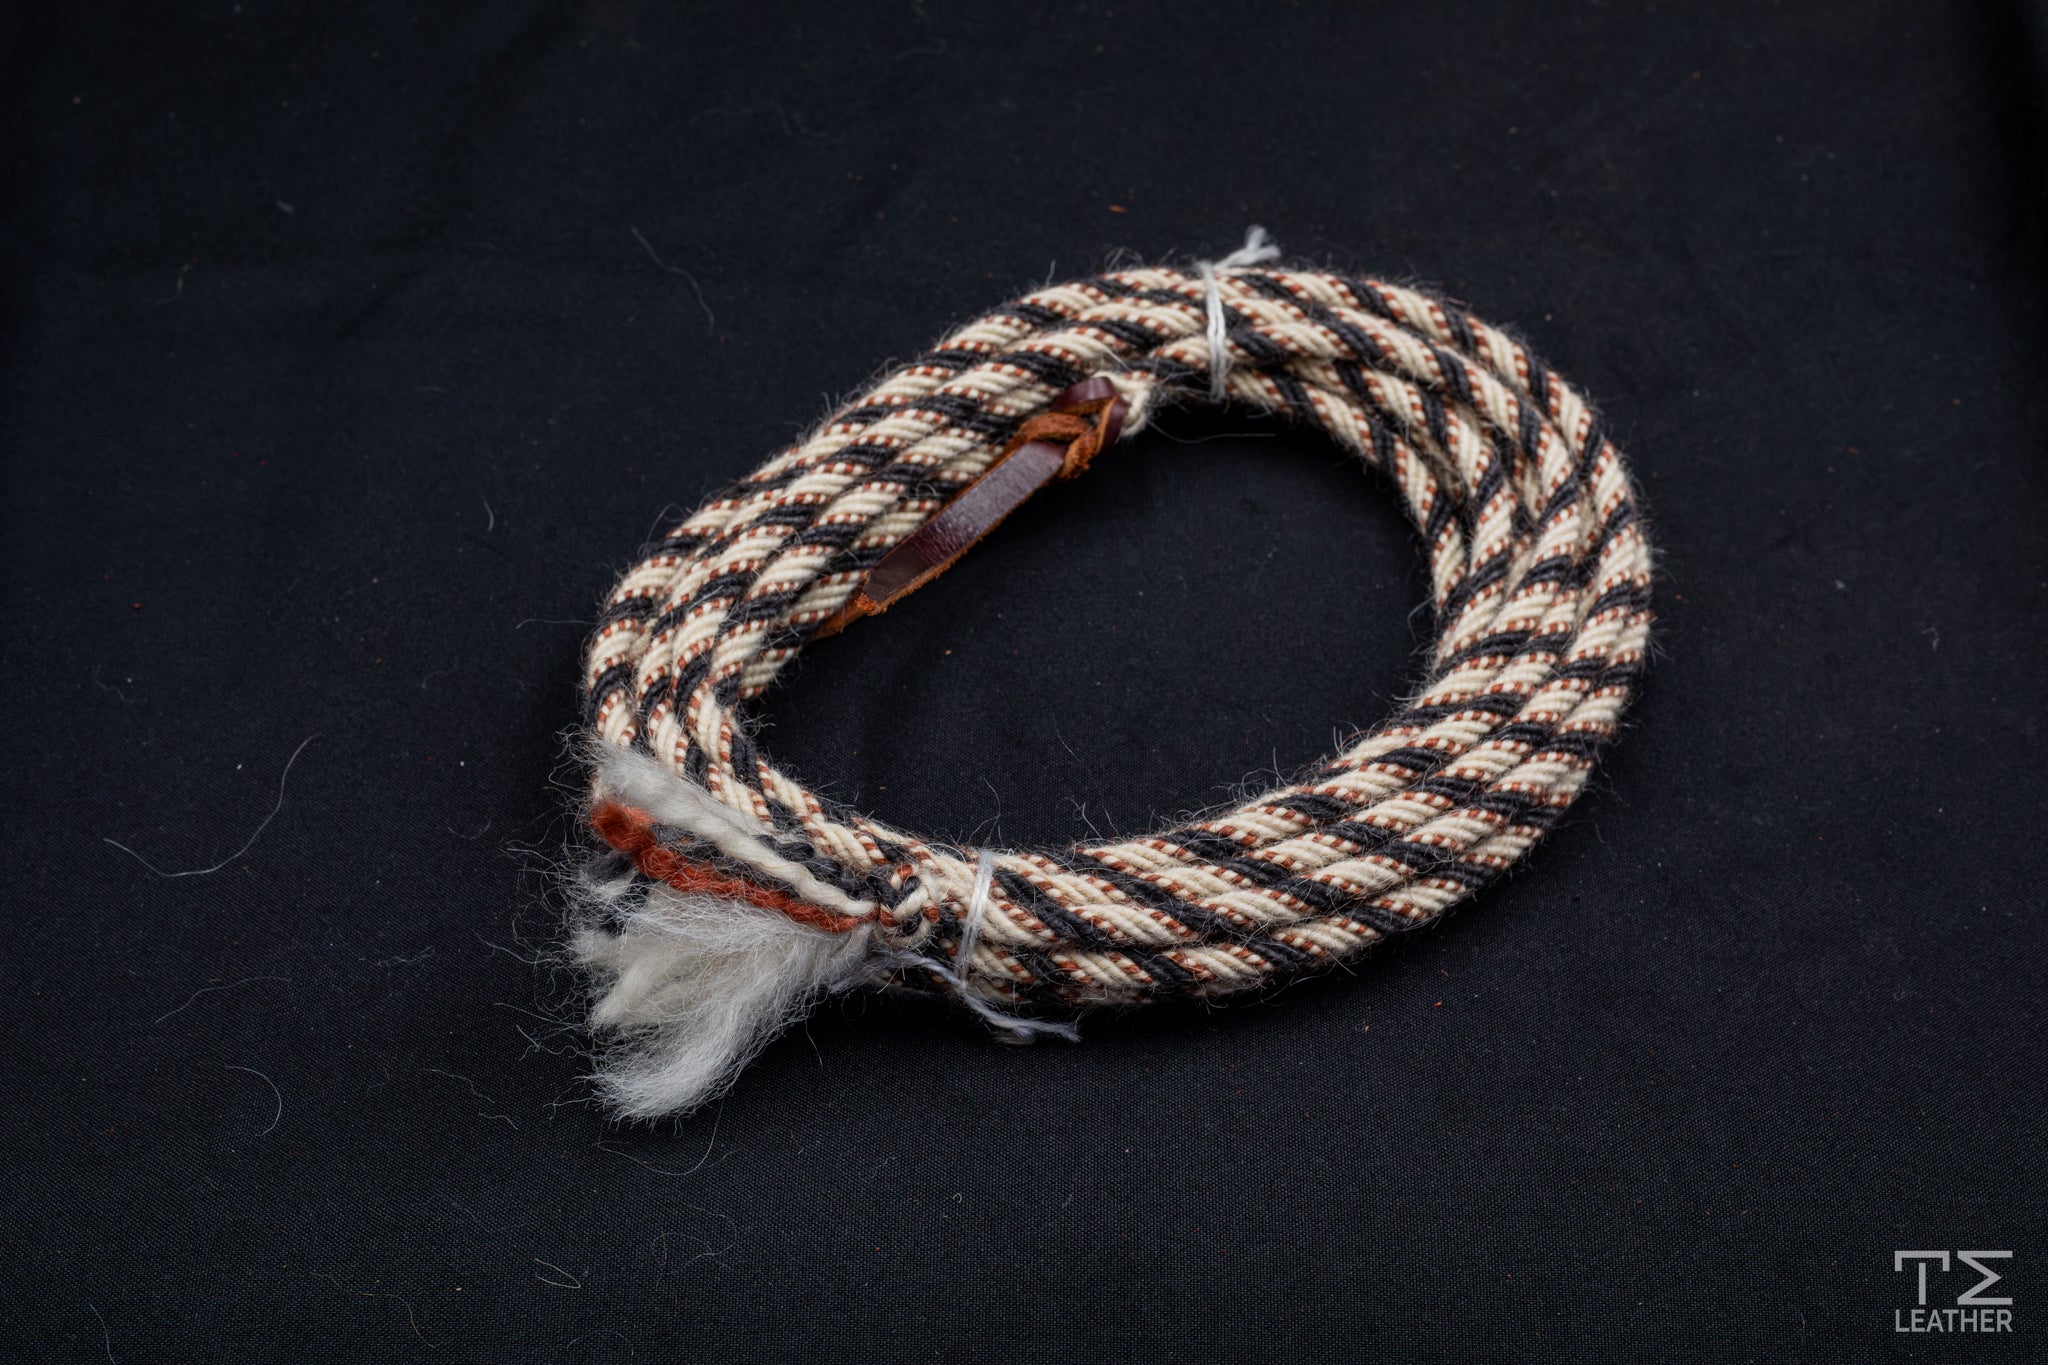 1/4" White, Grey & Copper Mohair Mecate